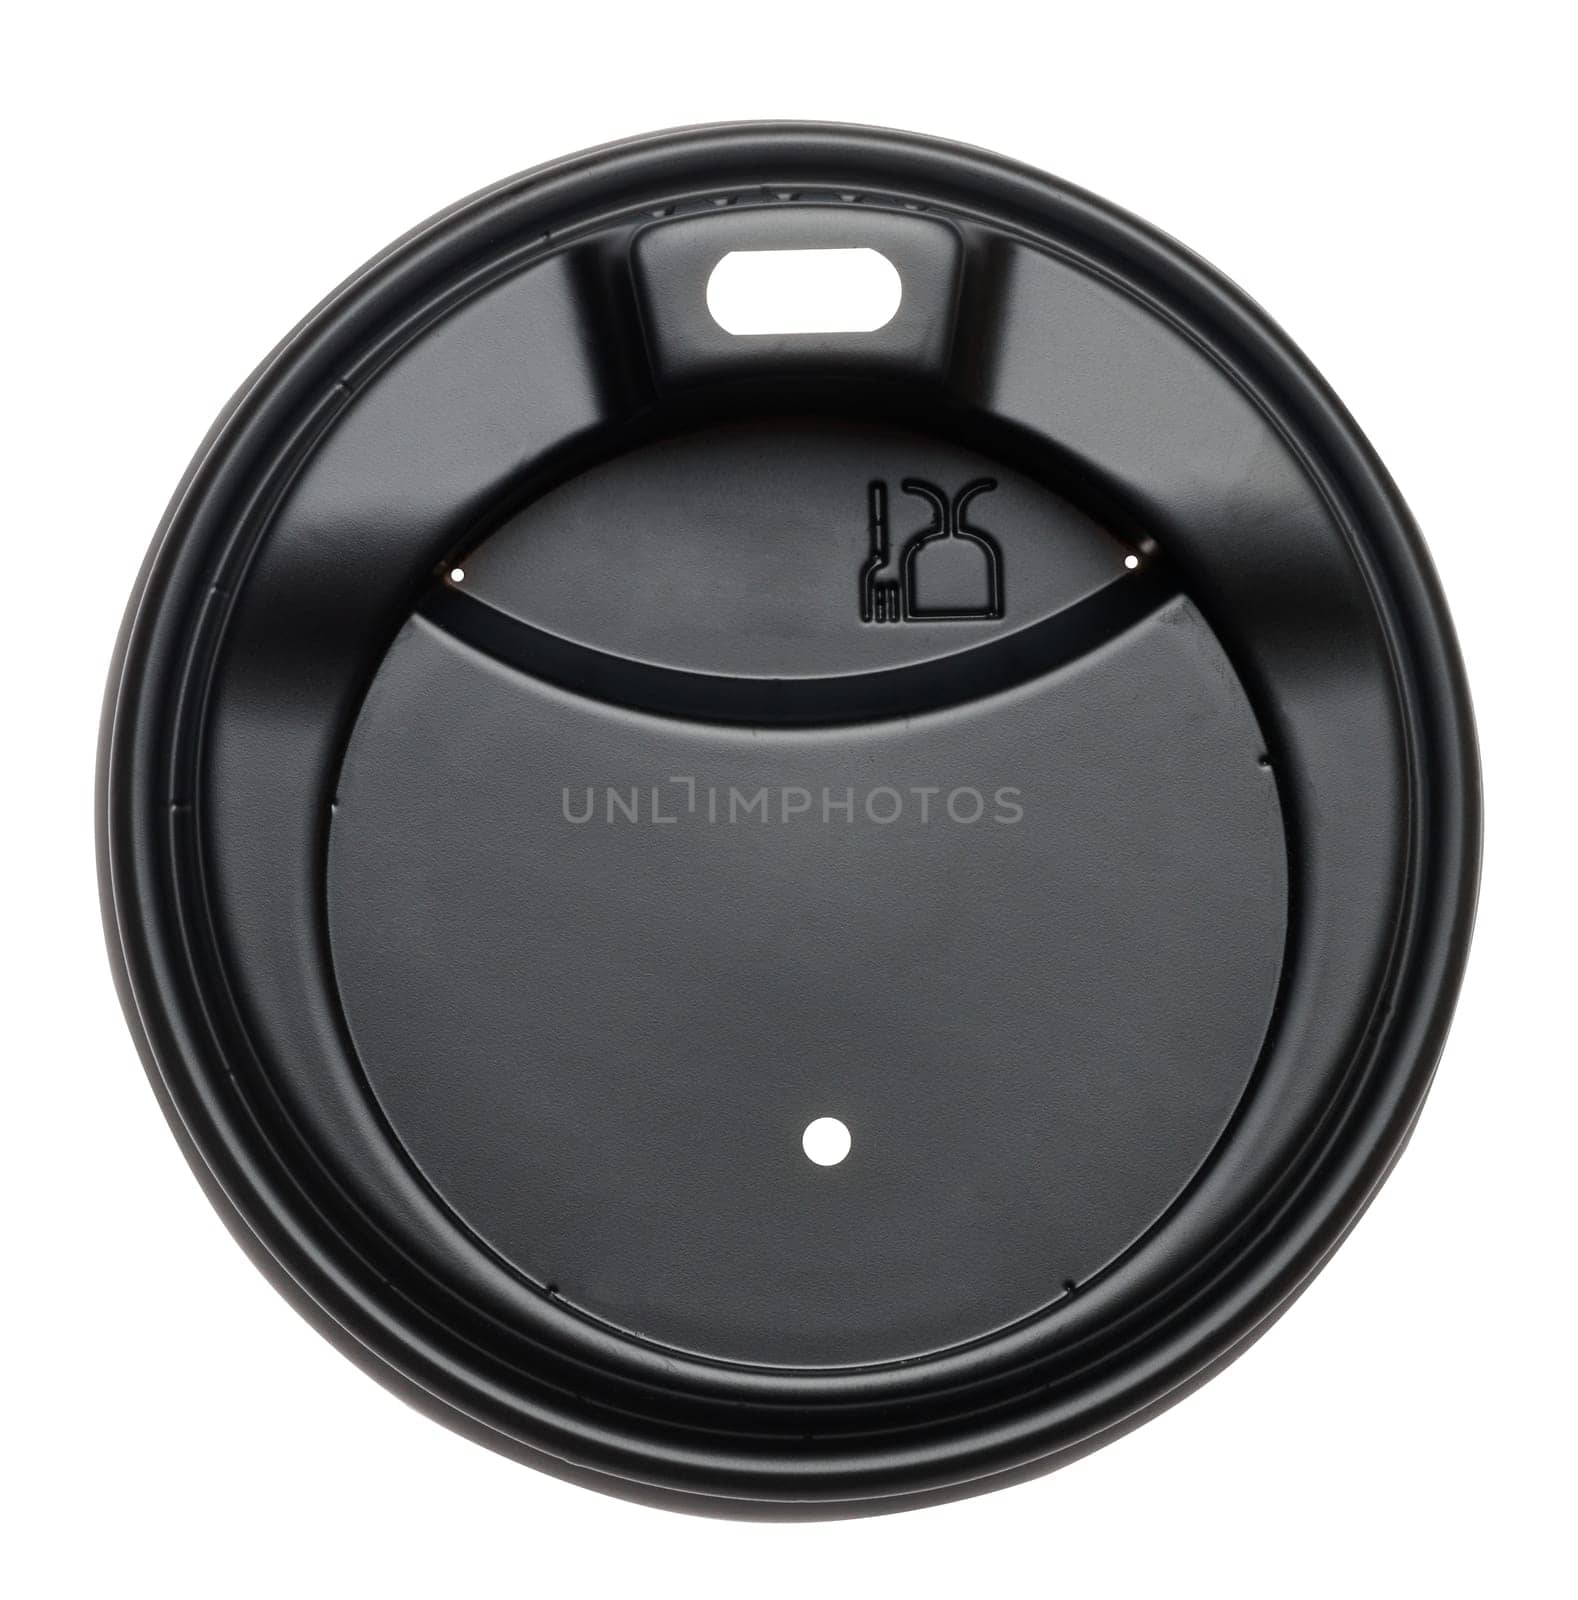 Black round plastic lid for paper cups, top view